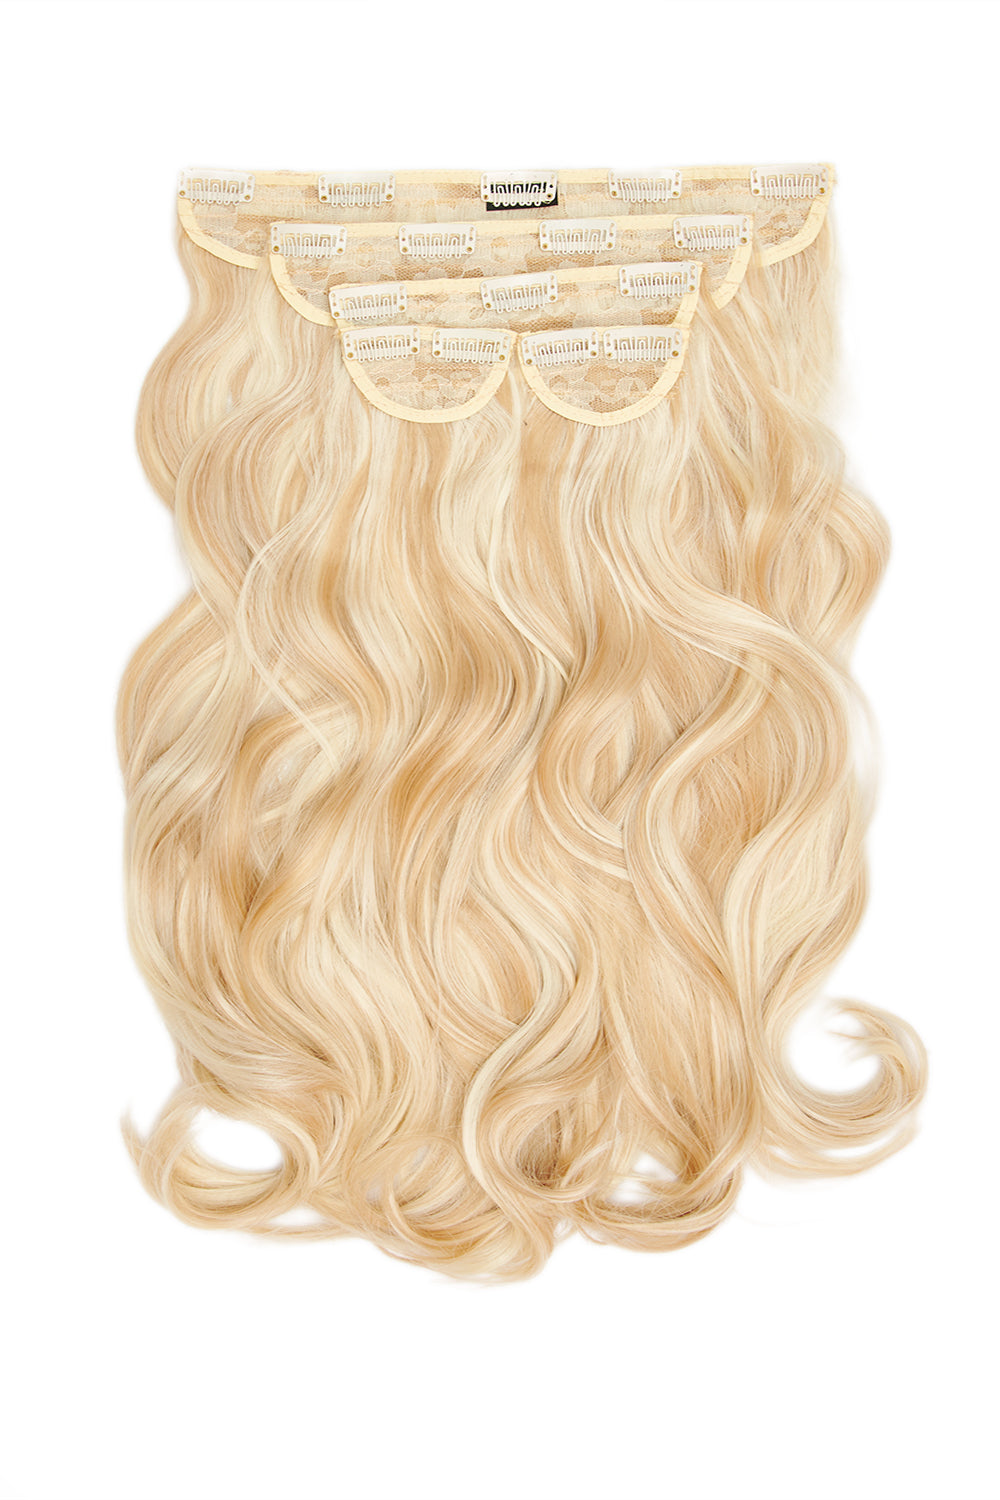 Super Thick 22" 5 Piece Blow Dry Wavy Clip In Hair Extensions - Highlighted Champagne